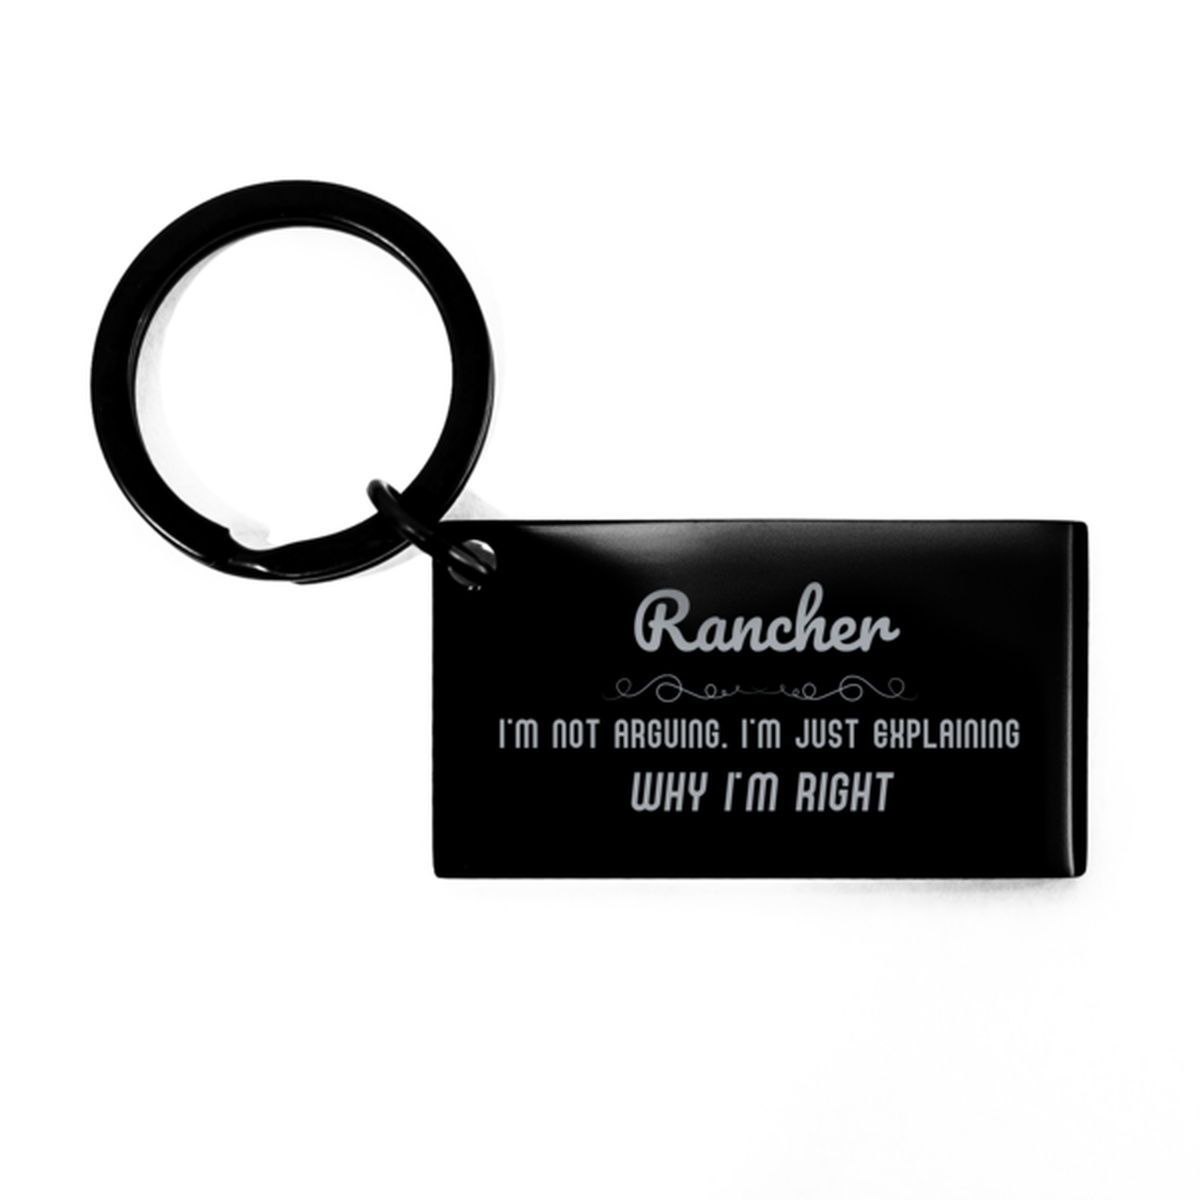 Rancher I'm not Arguing. I'm Just Explaining Why I'm RIGHT Keychain, Funny Saying Quote Rancher Gifts For Rancher Graduation Birthday Christmas Gifts for Men Women Coworker